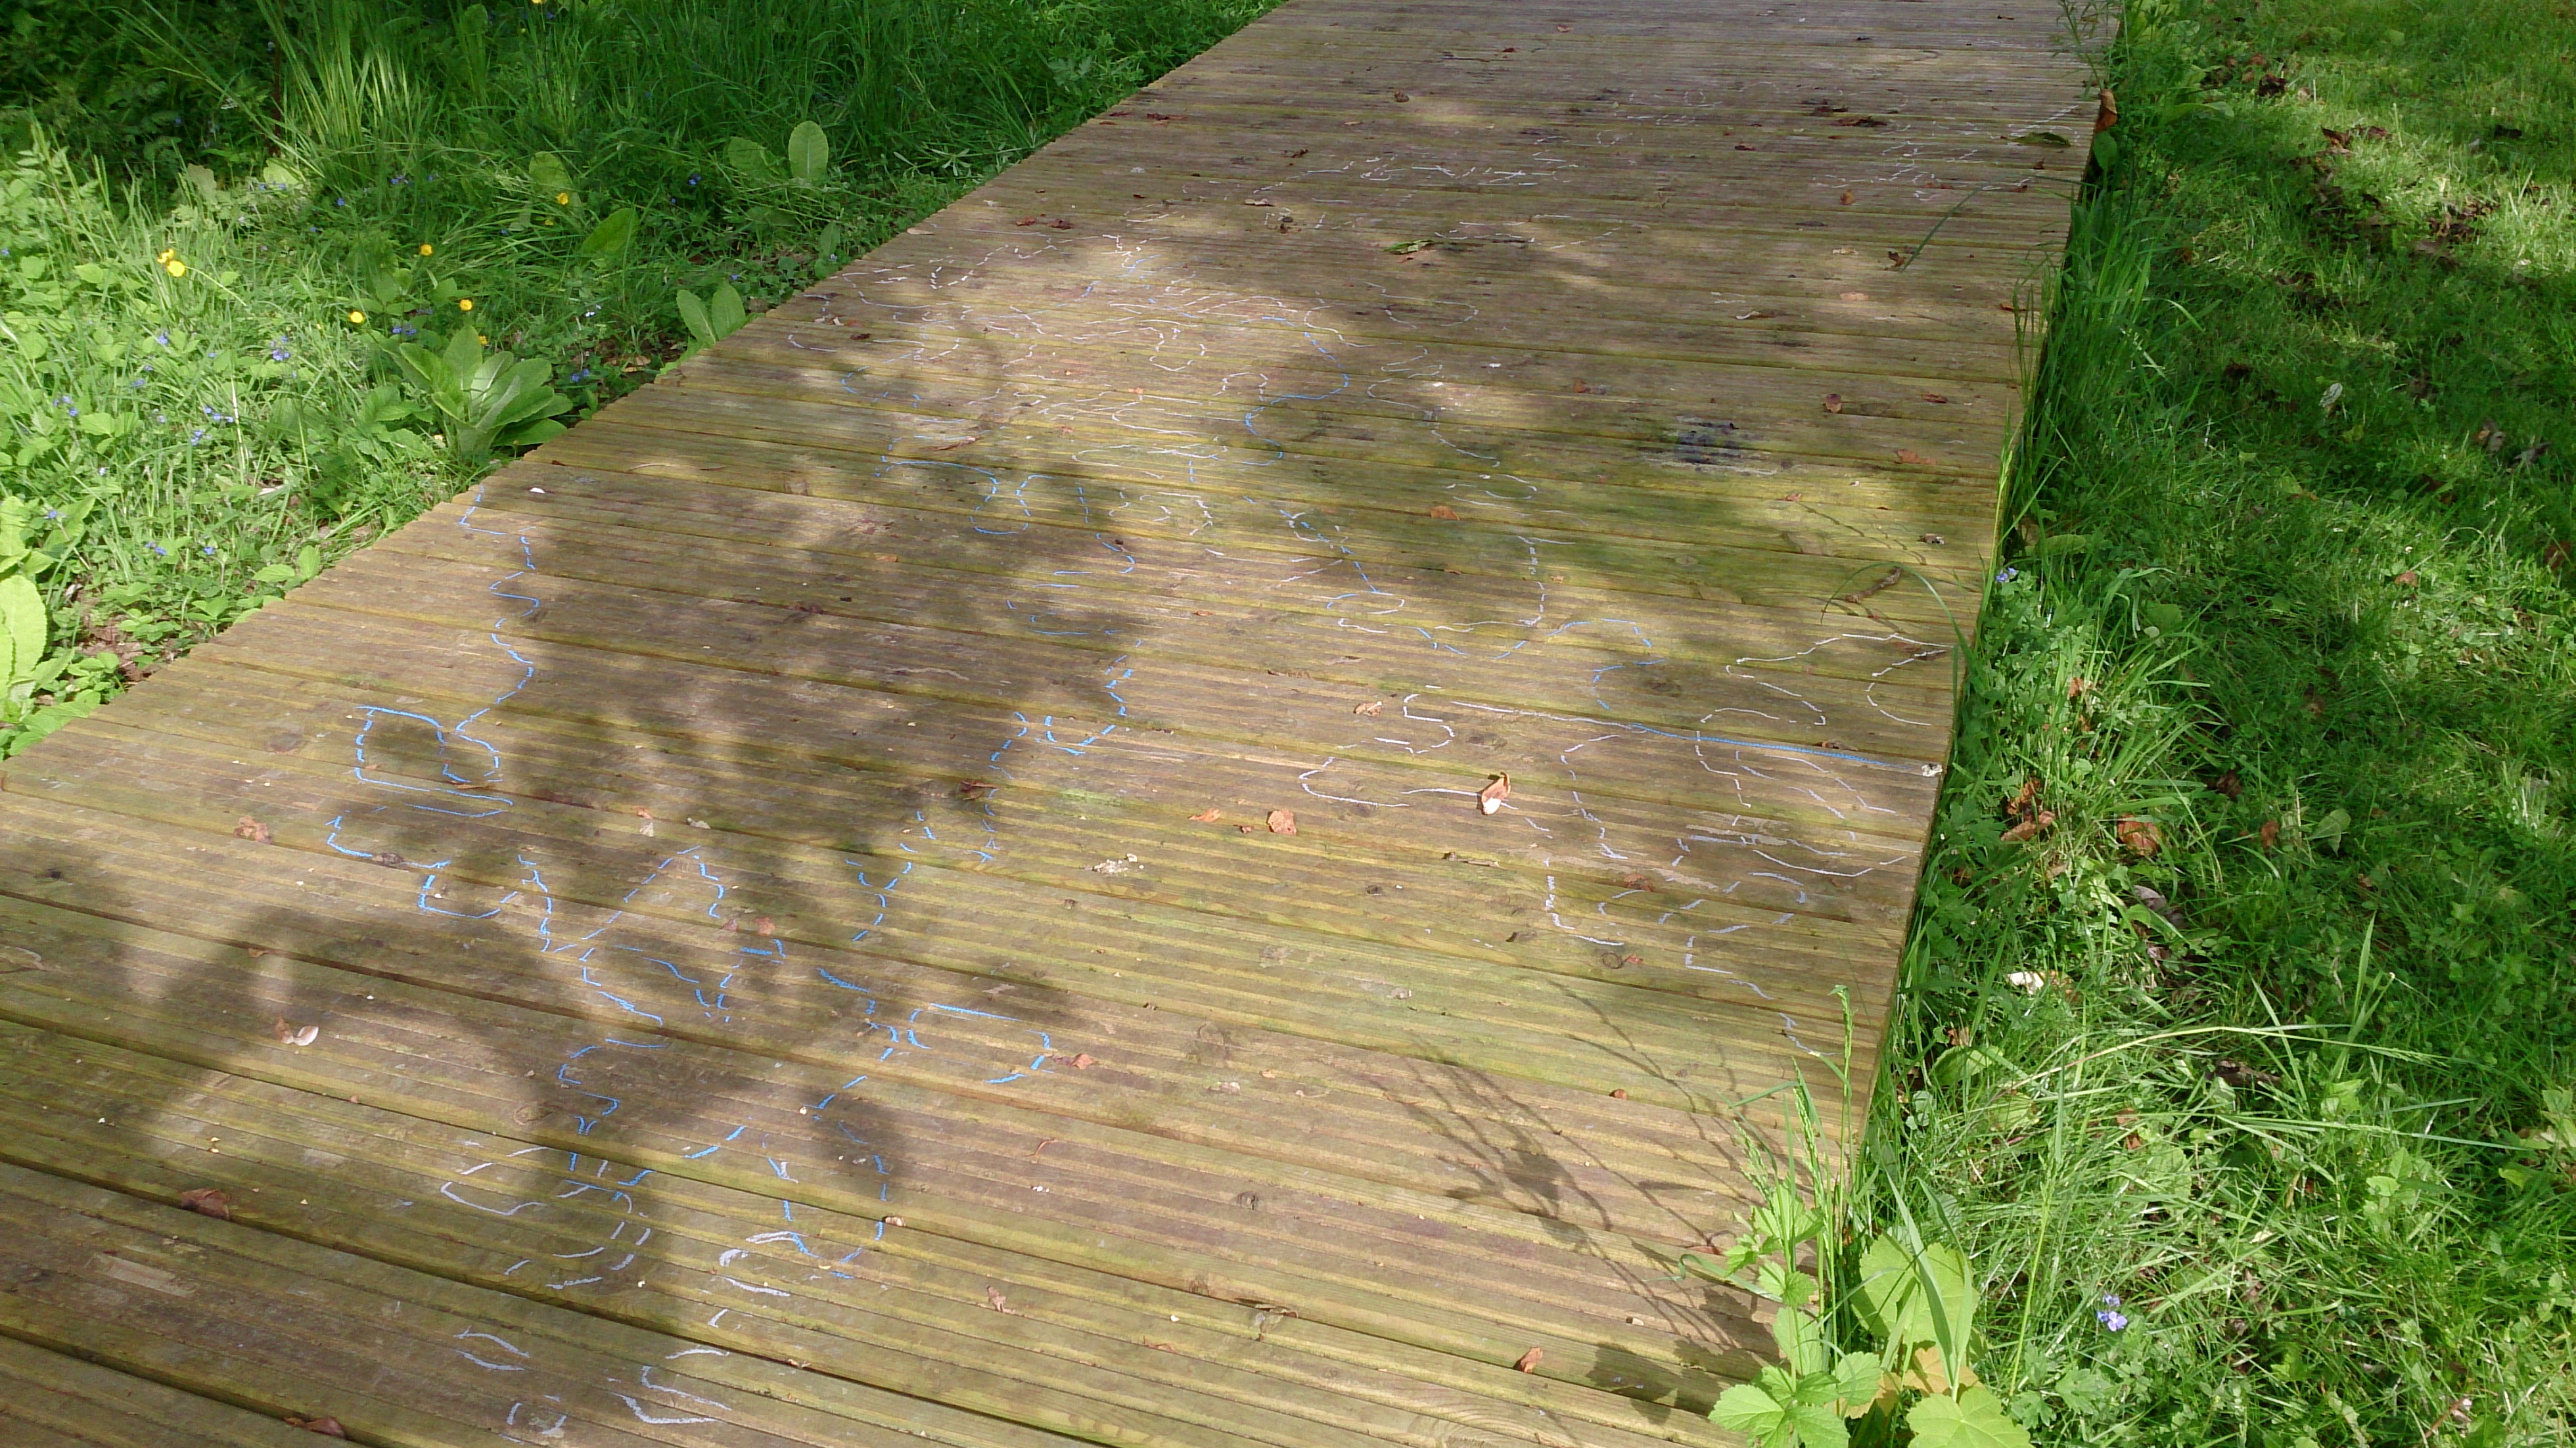 chalk markings on decking in white, grey and blue around the shadows of leaves from a Magnolia tree, framed by green grass